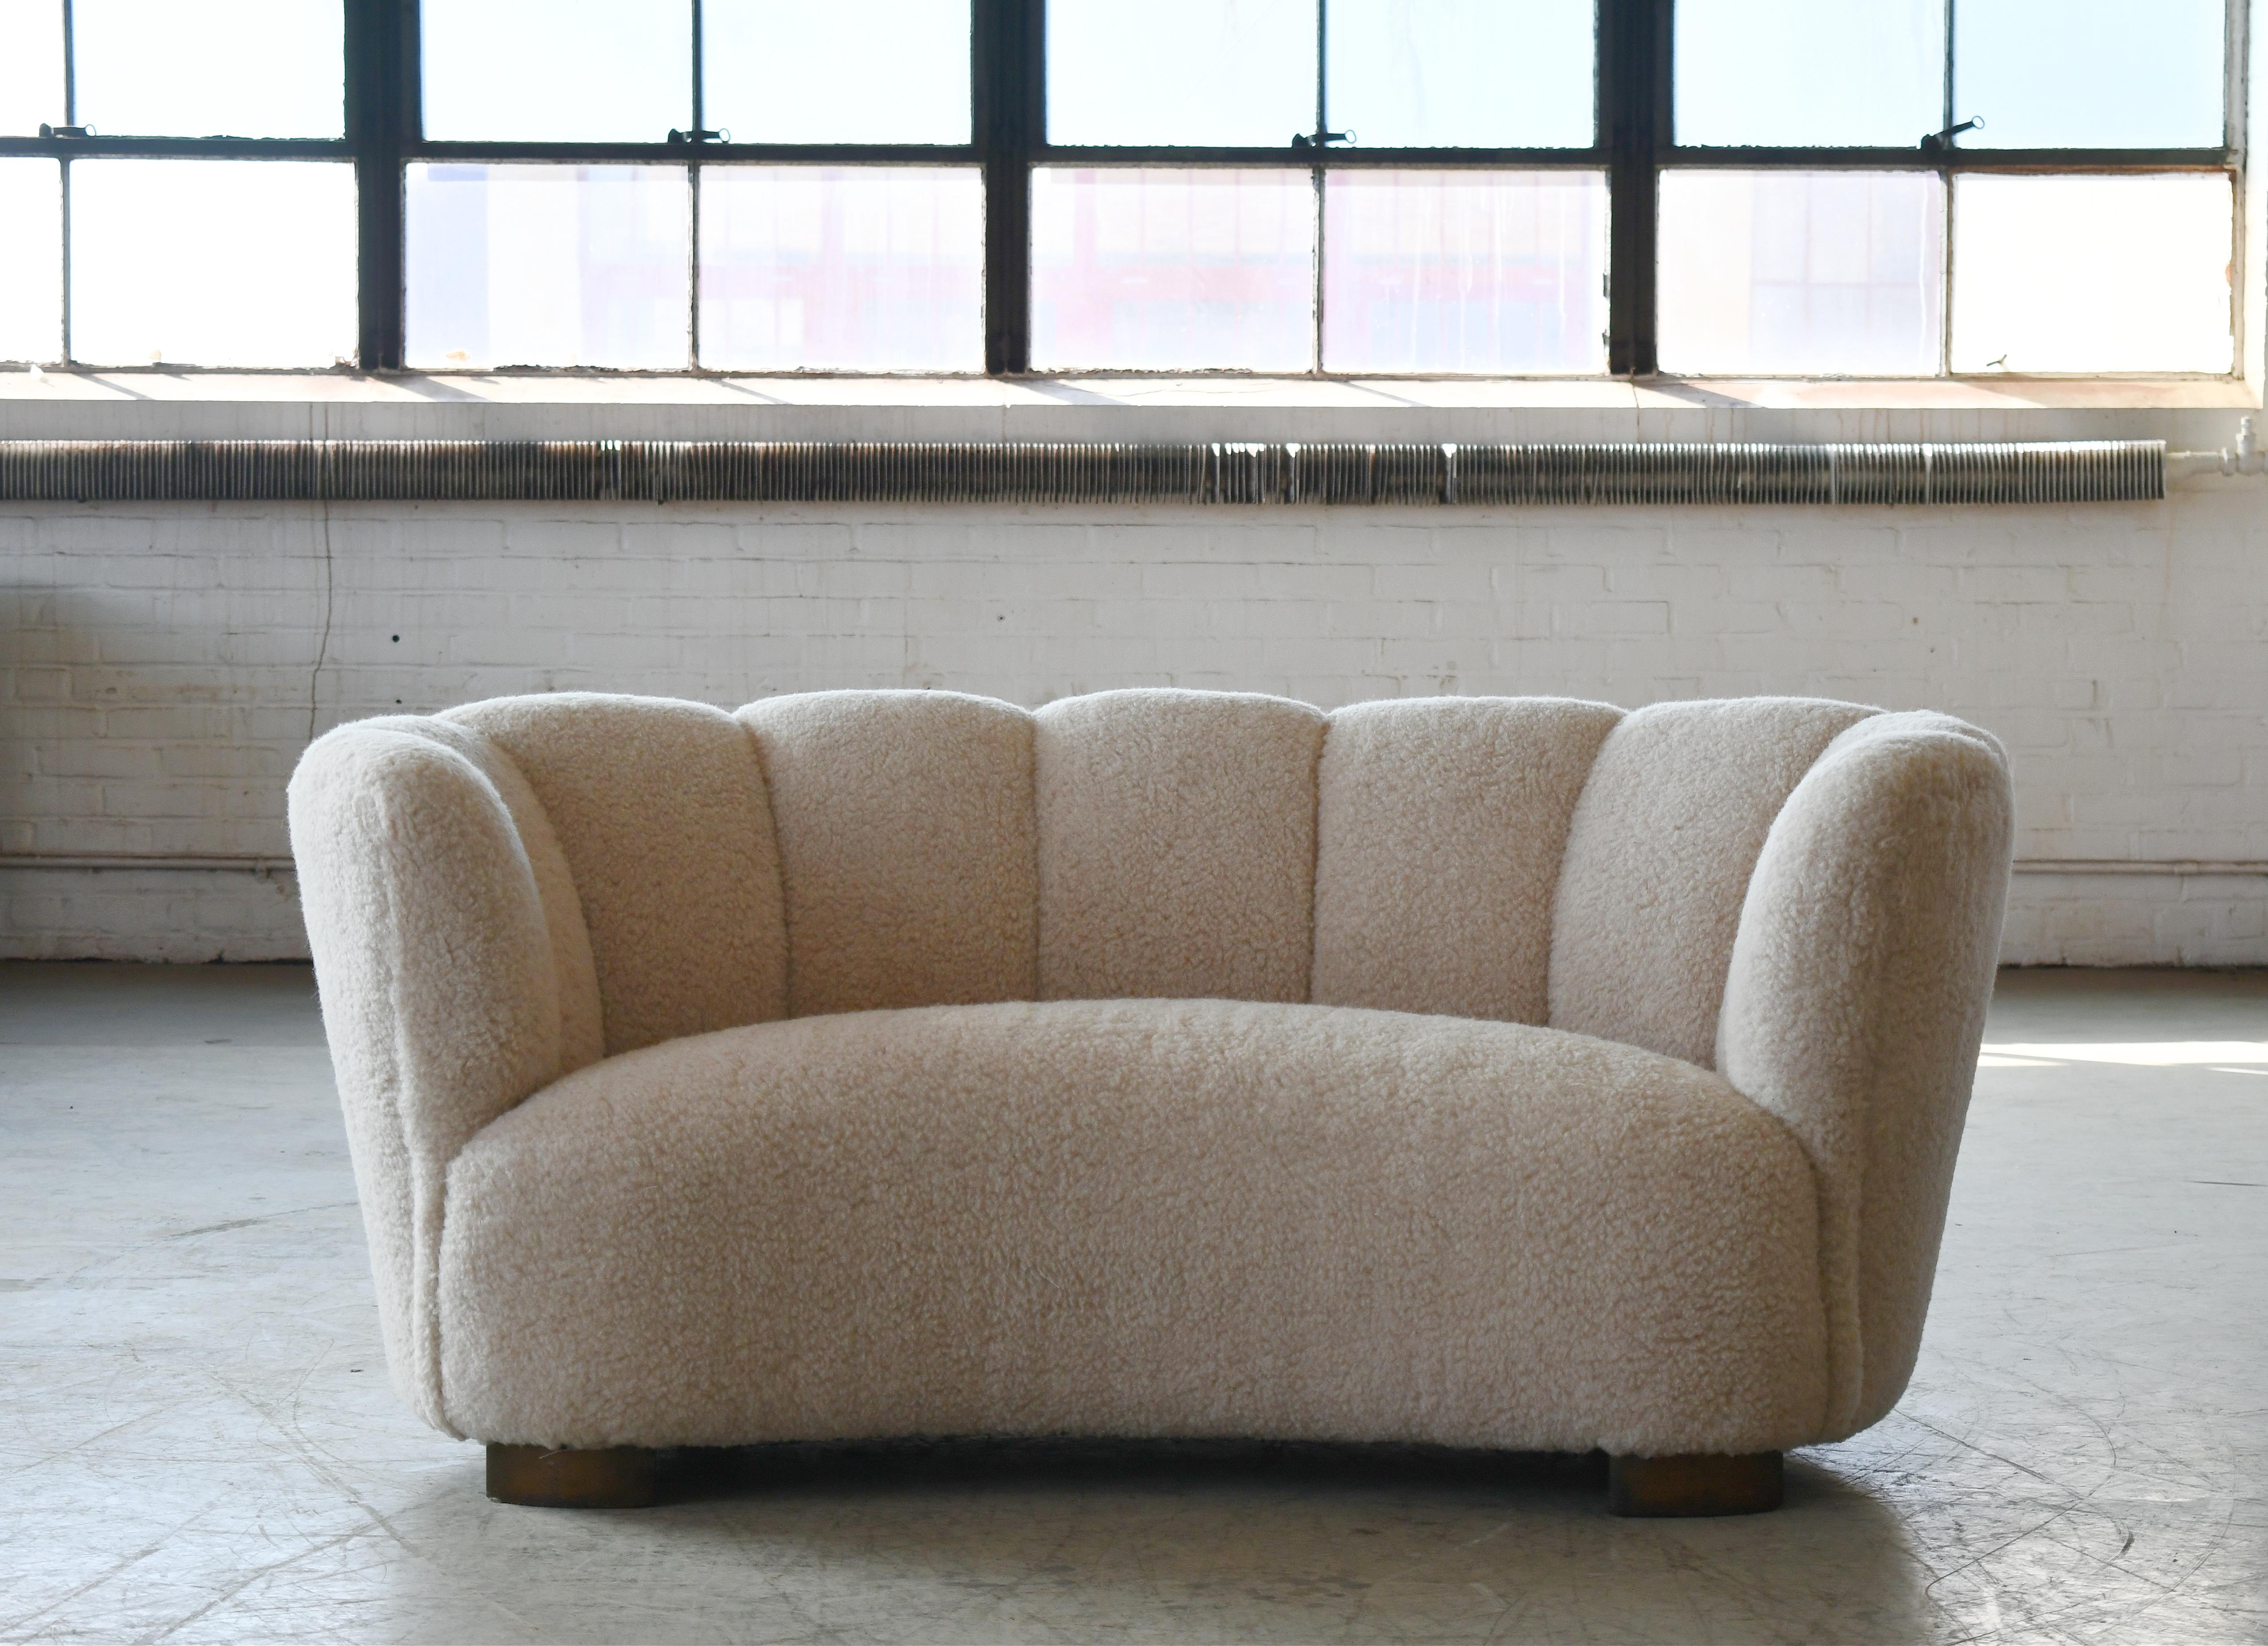 Banana shaped Viggo Boesen style curved two-seat sofa or loveseat made in Denmark in the 1940s. This sofa will make a strong statement in any room. Beautiful round lines and iconic block feet feet normally associated with Viggo Boesen. Fully